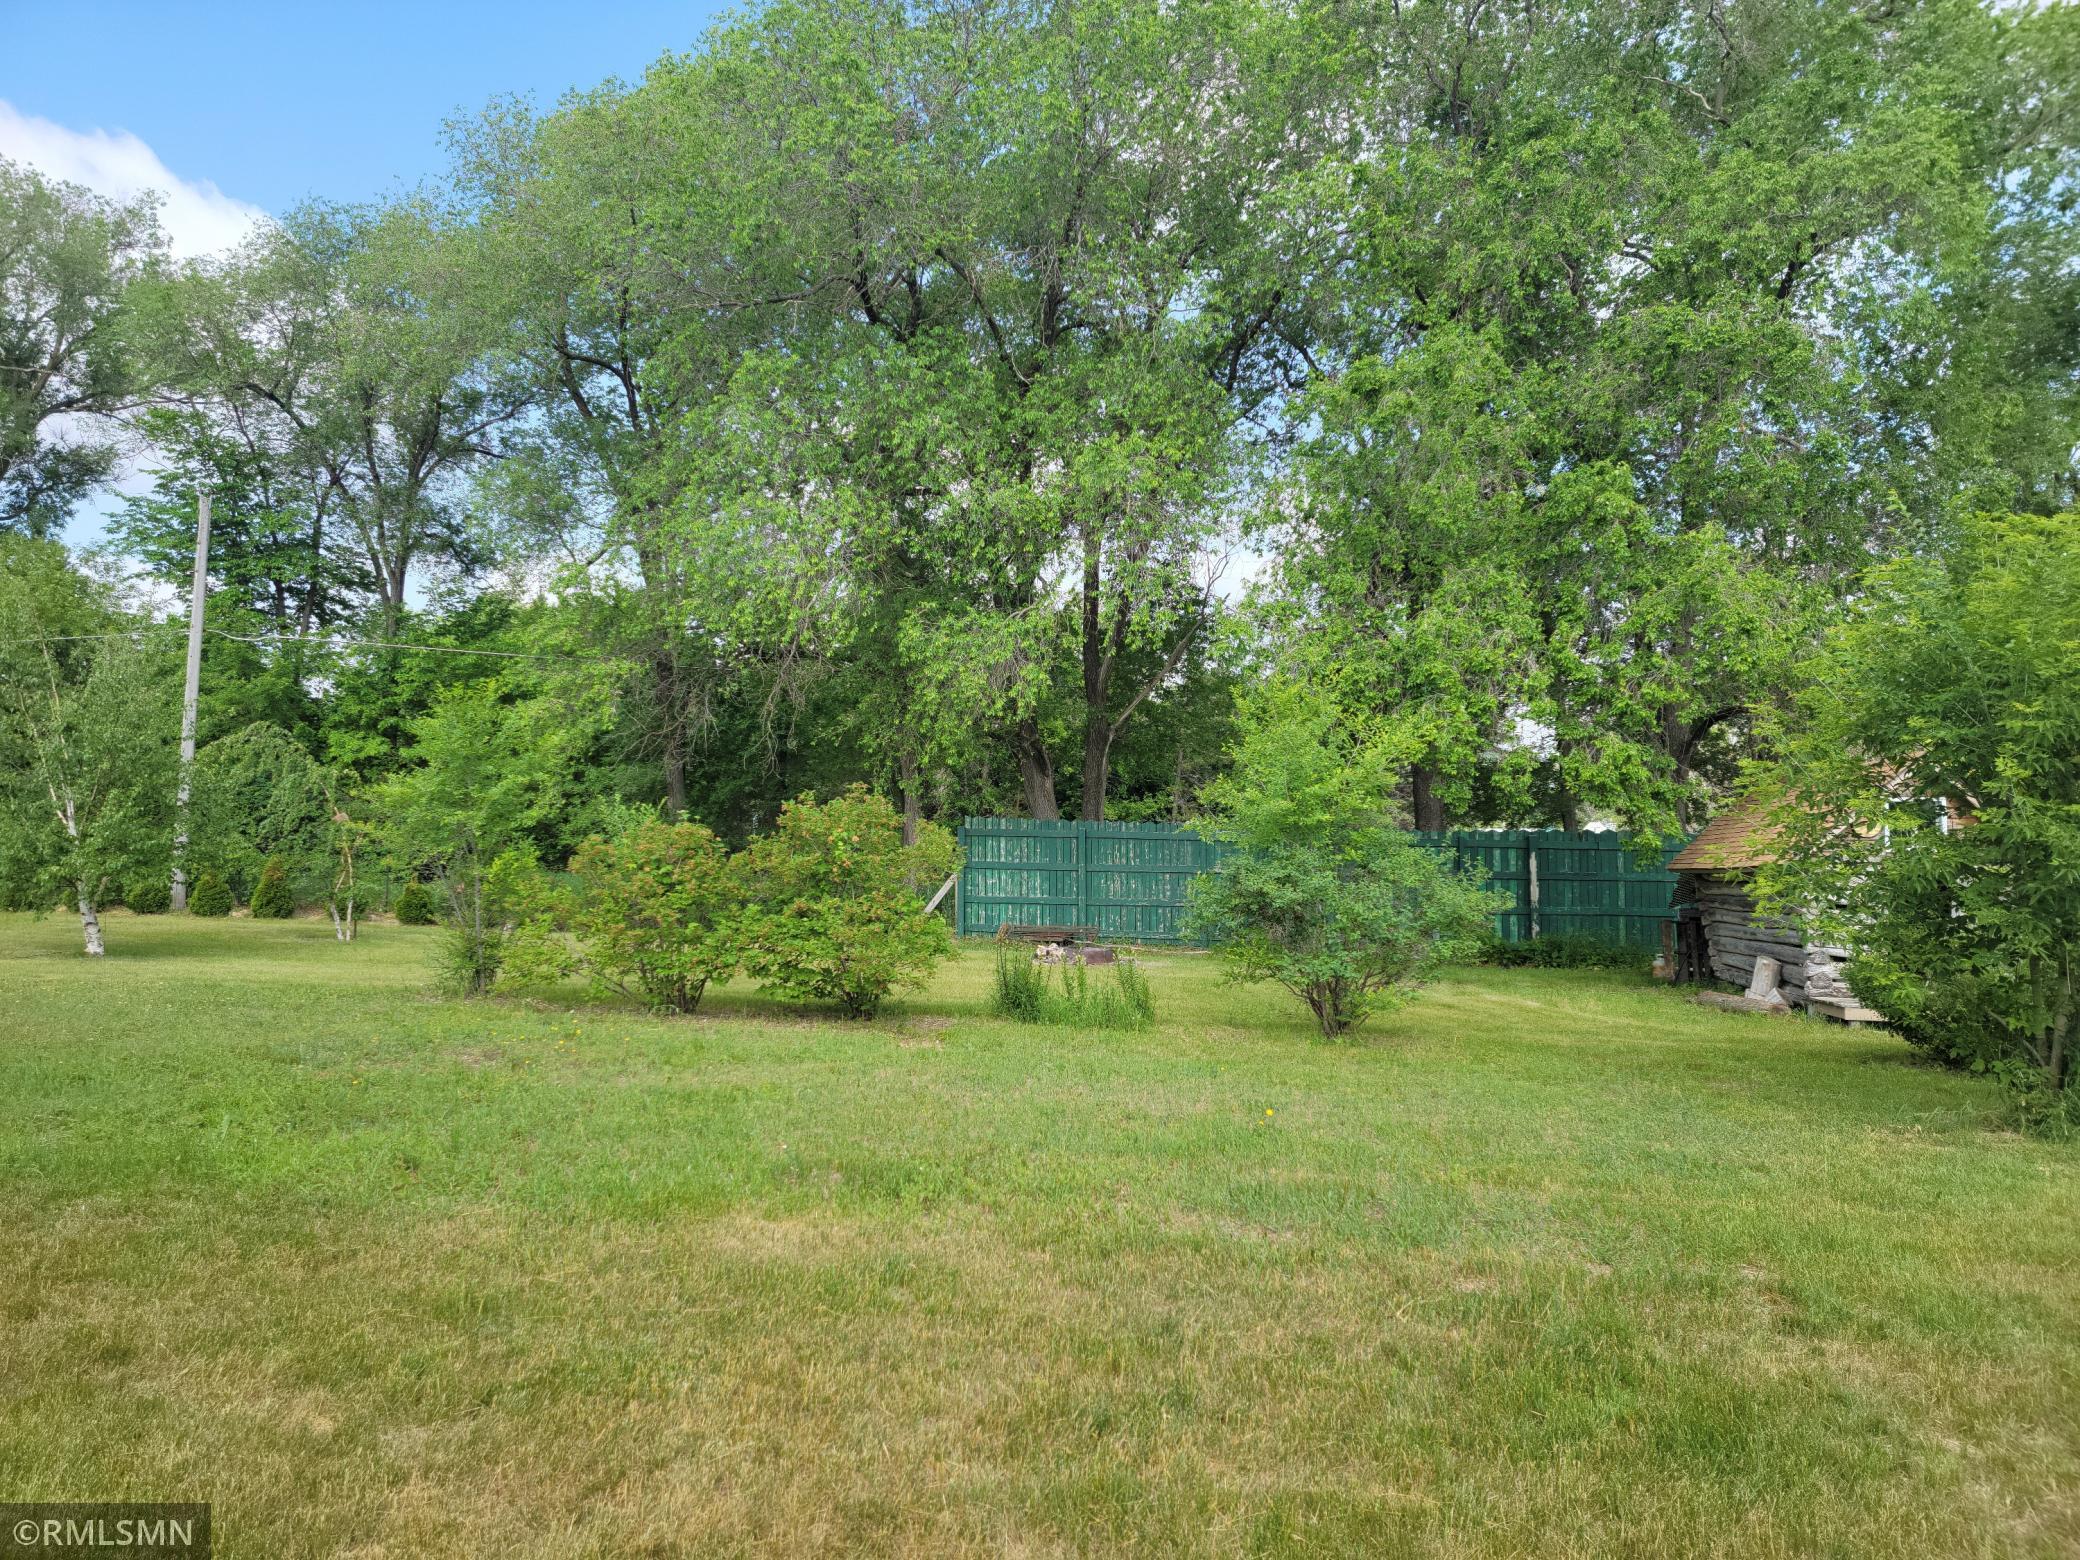 This property has a big yard with nice trees.